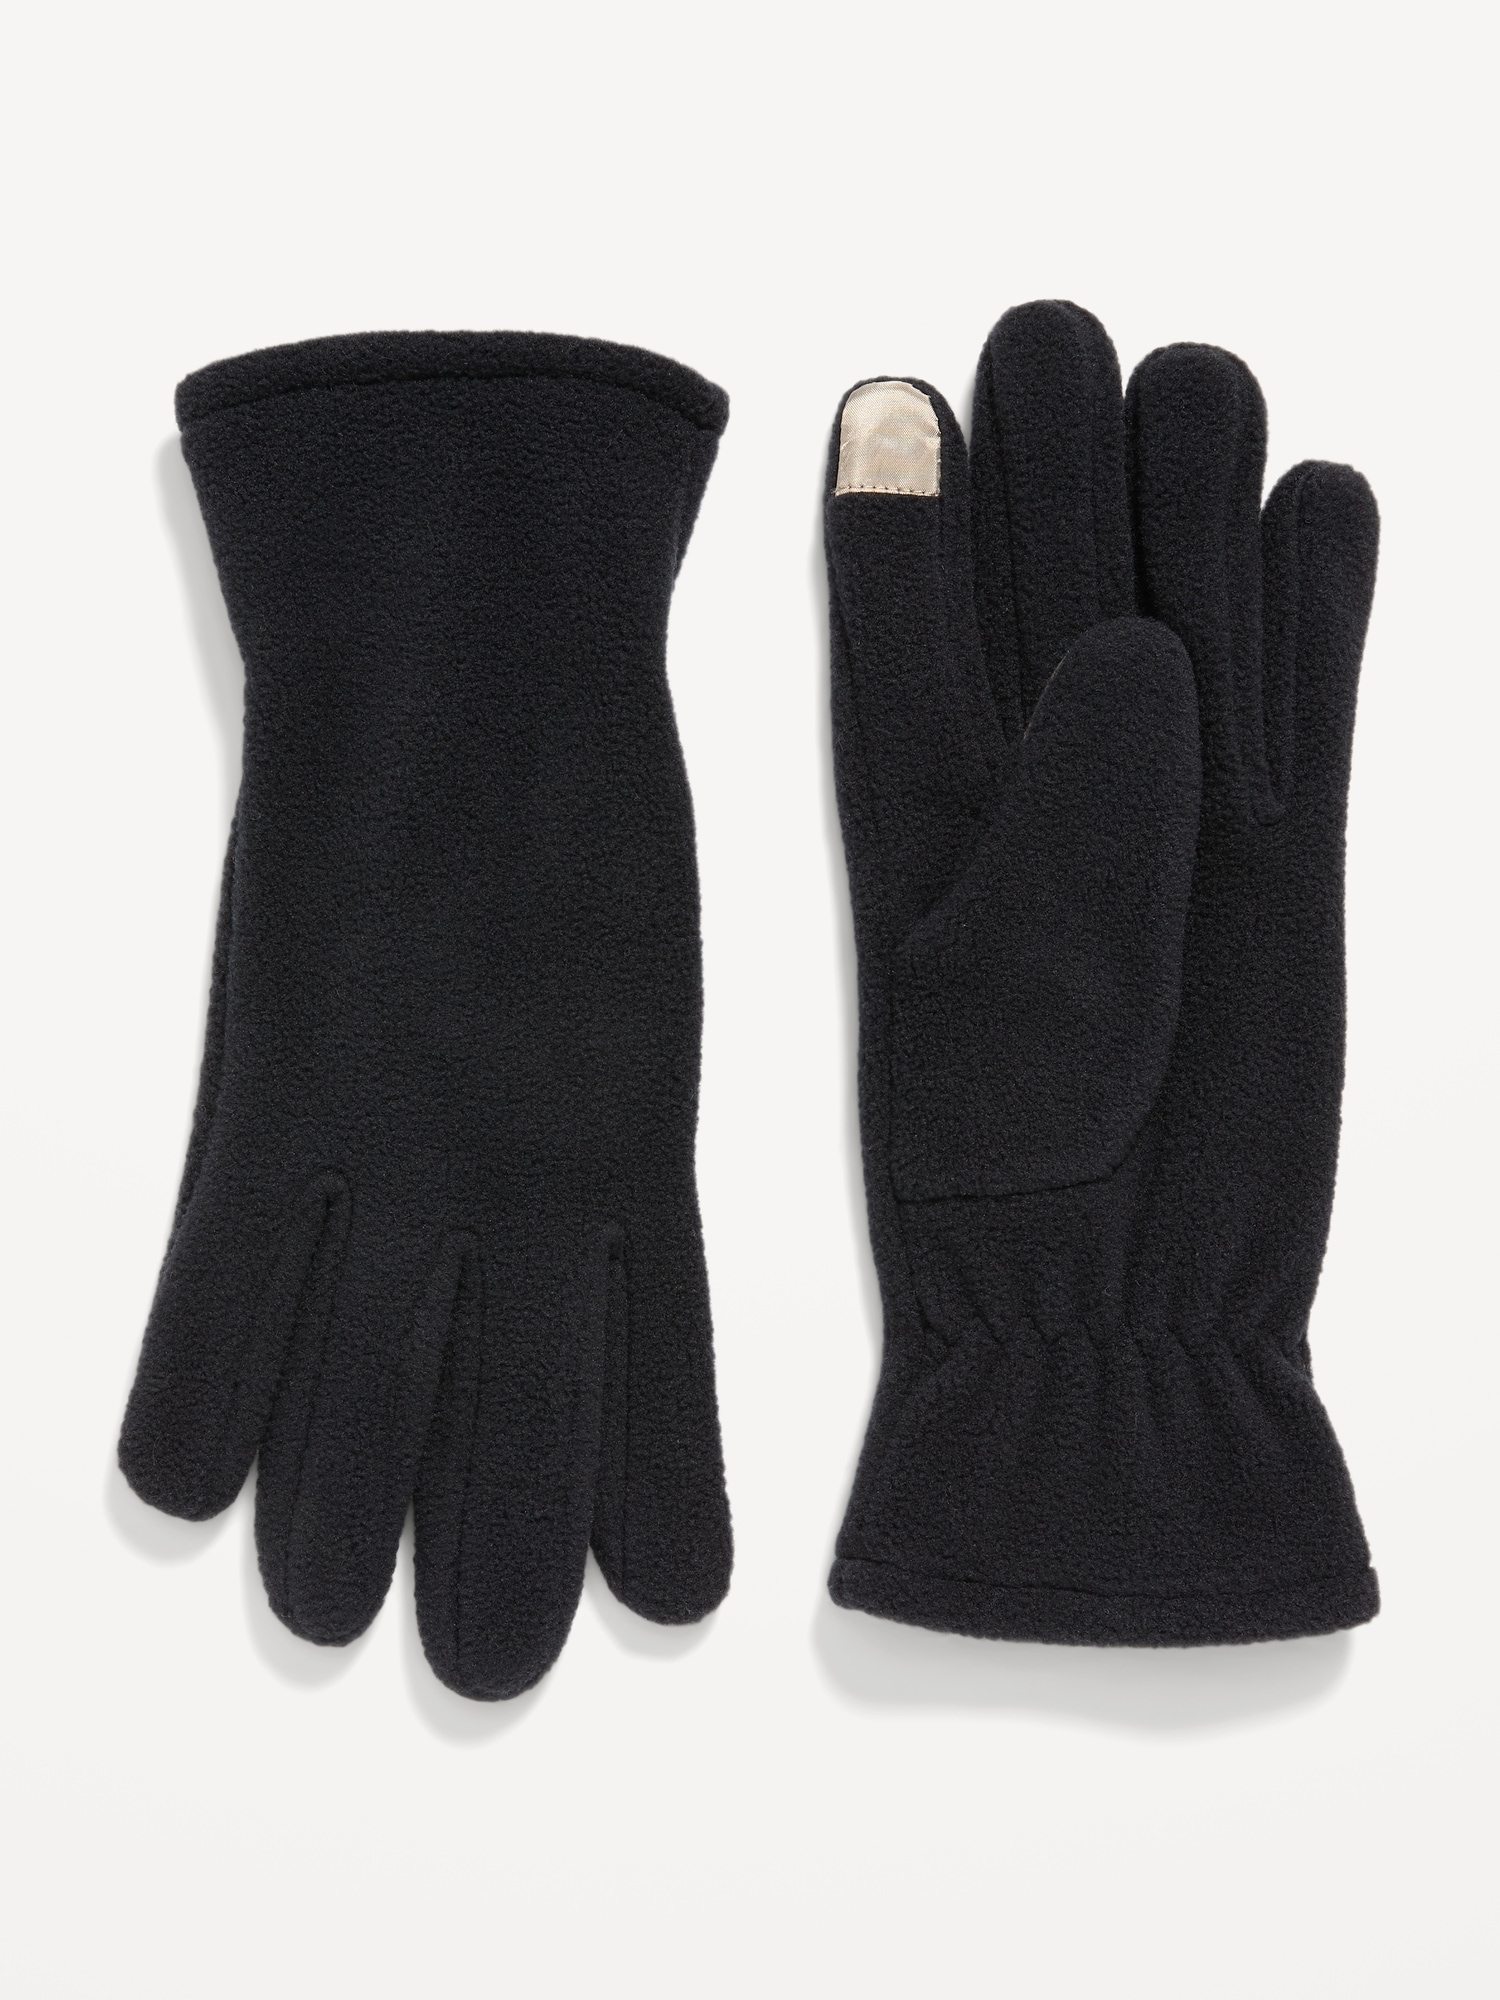 Old Navy Text-Friendly Performance Fleece Gloves for Women black. 1